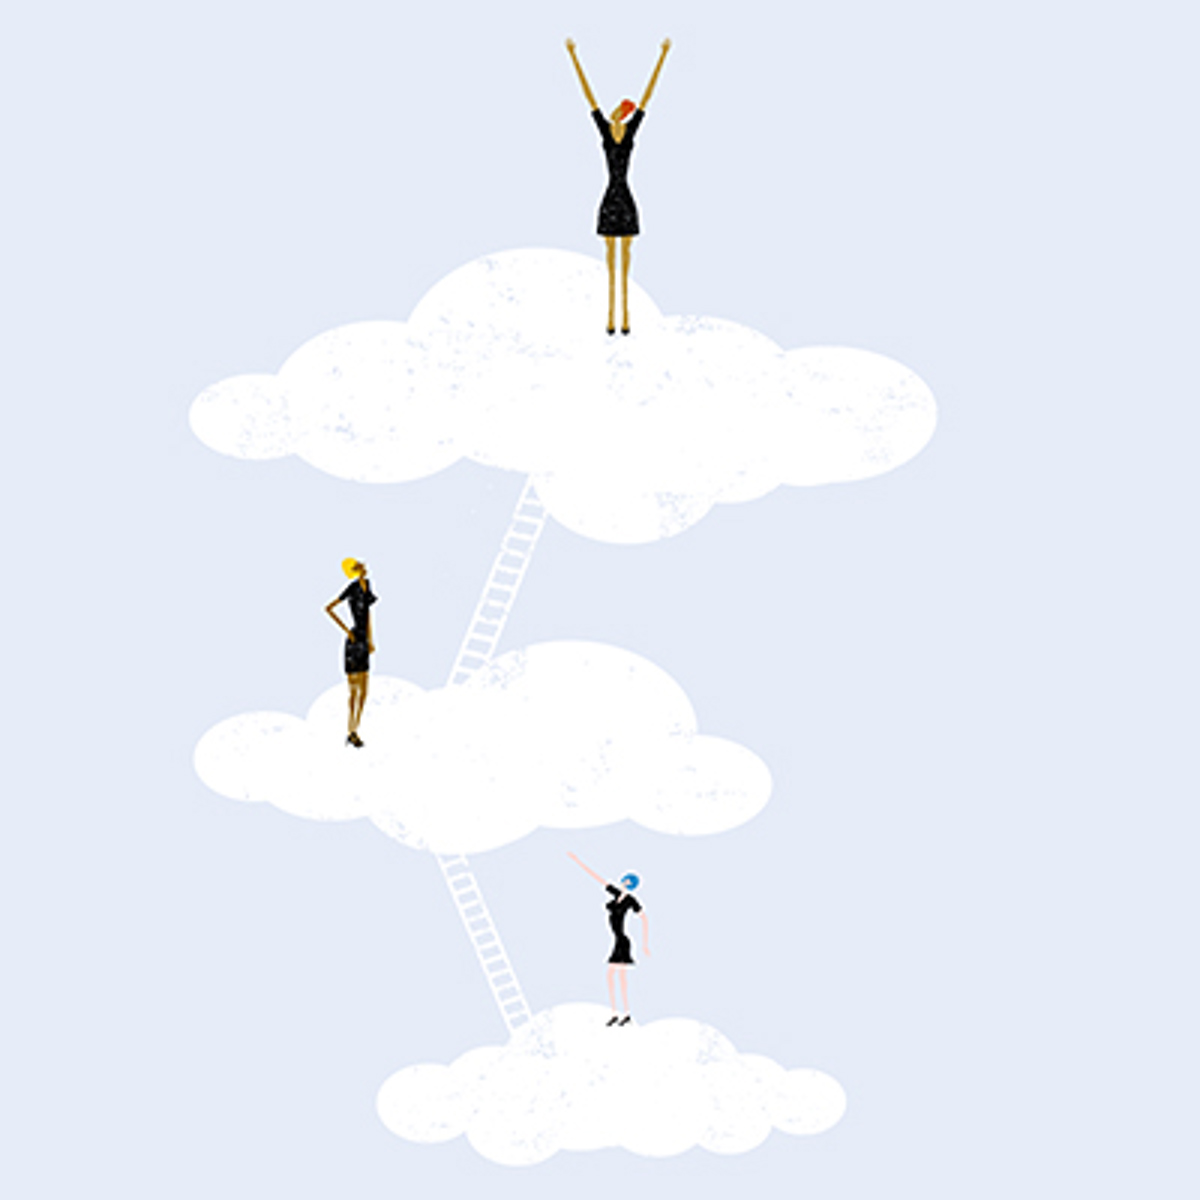 Illustration showing figures moving between clouds